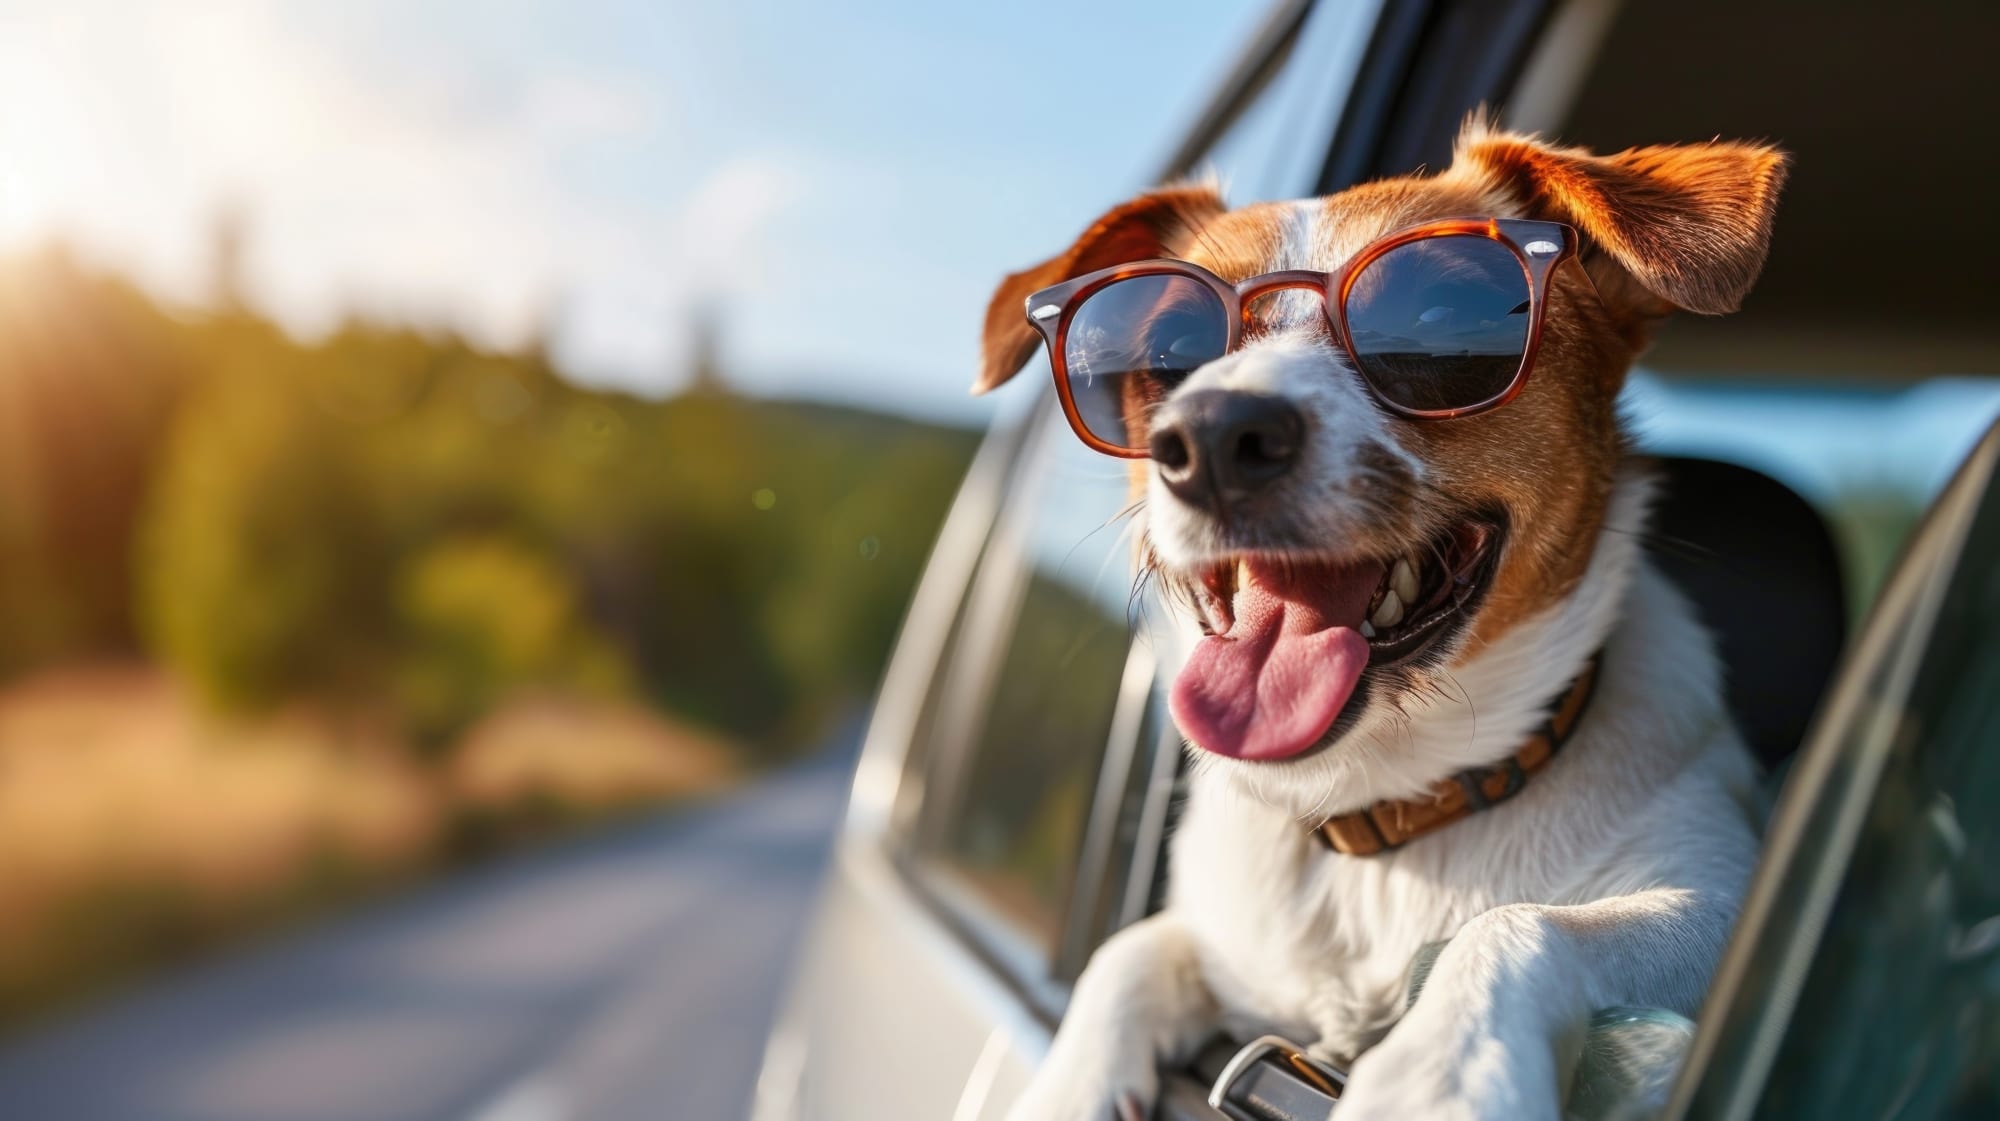 Florida Trips With Your Furry Friend